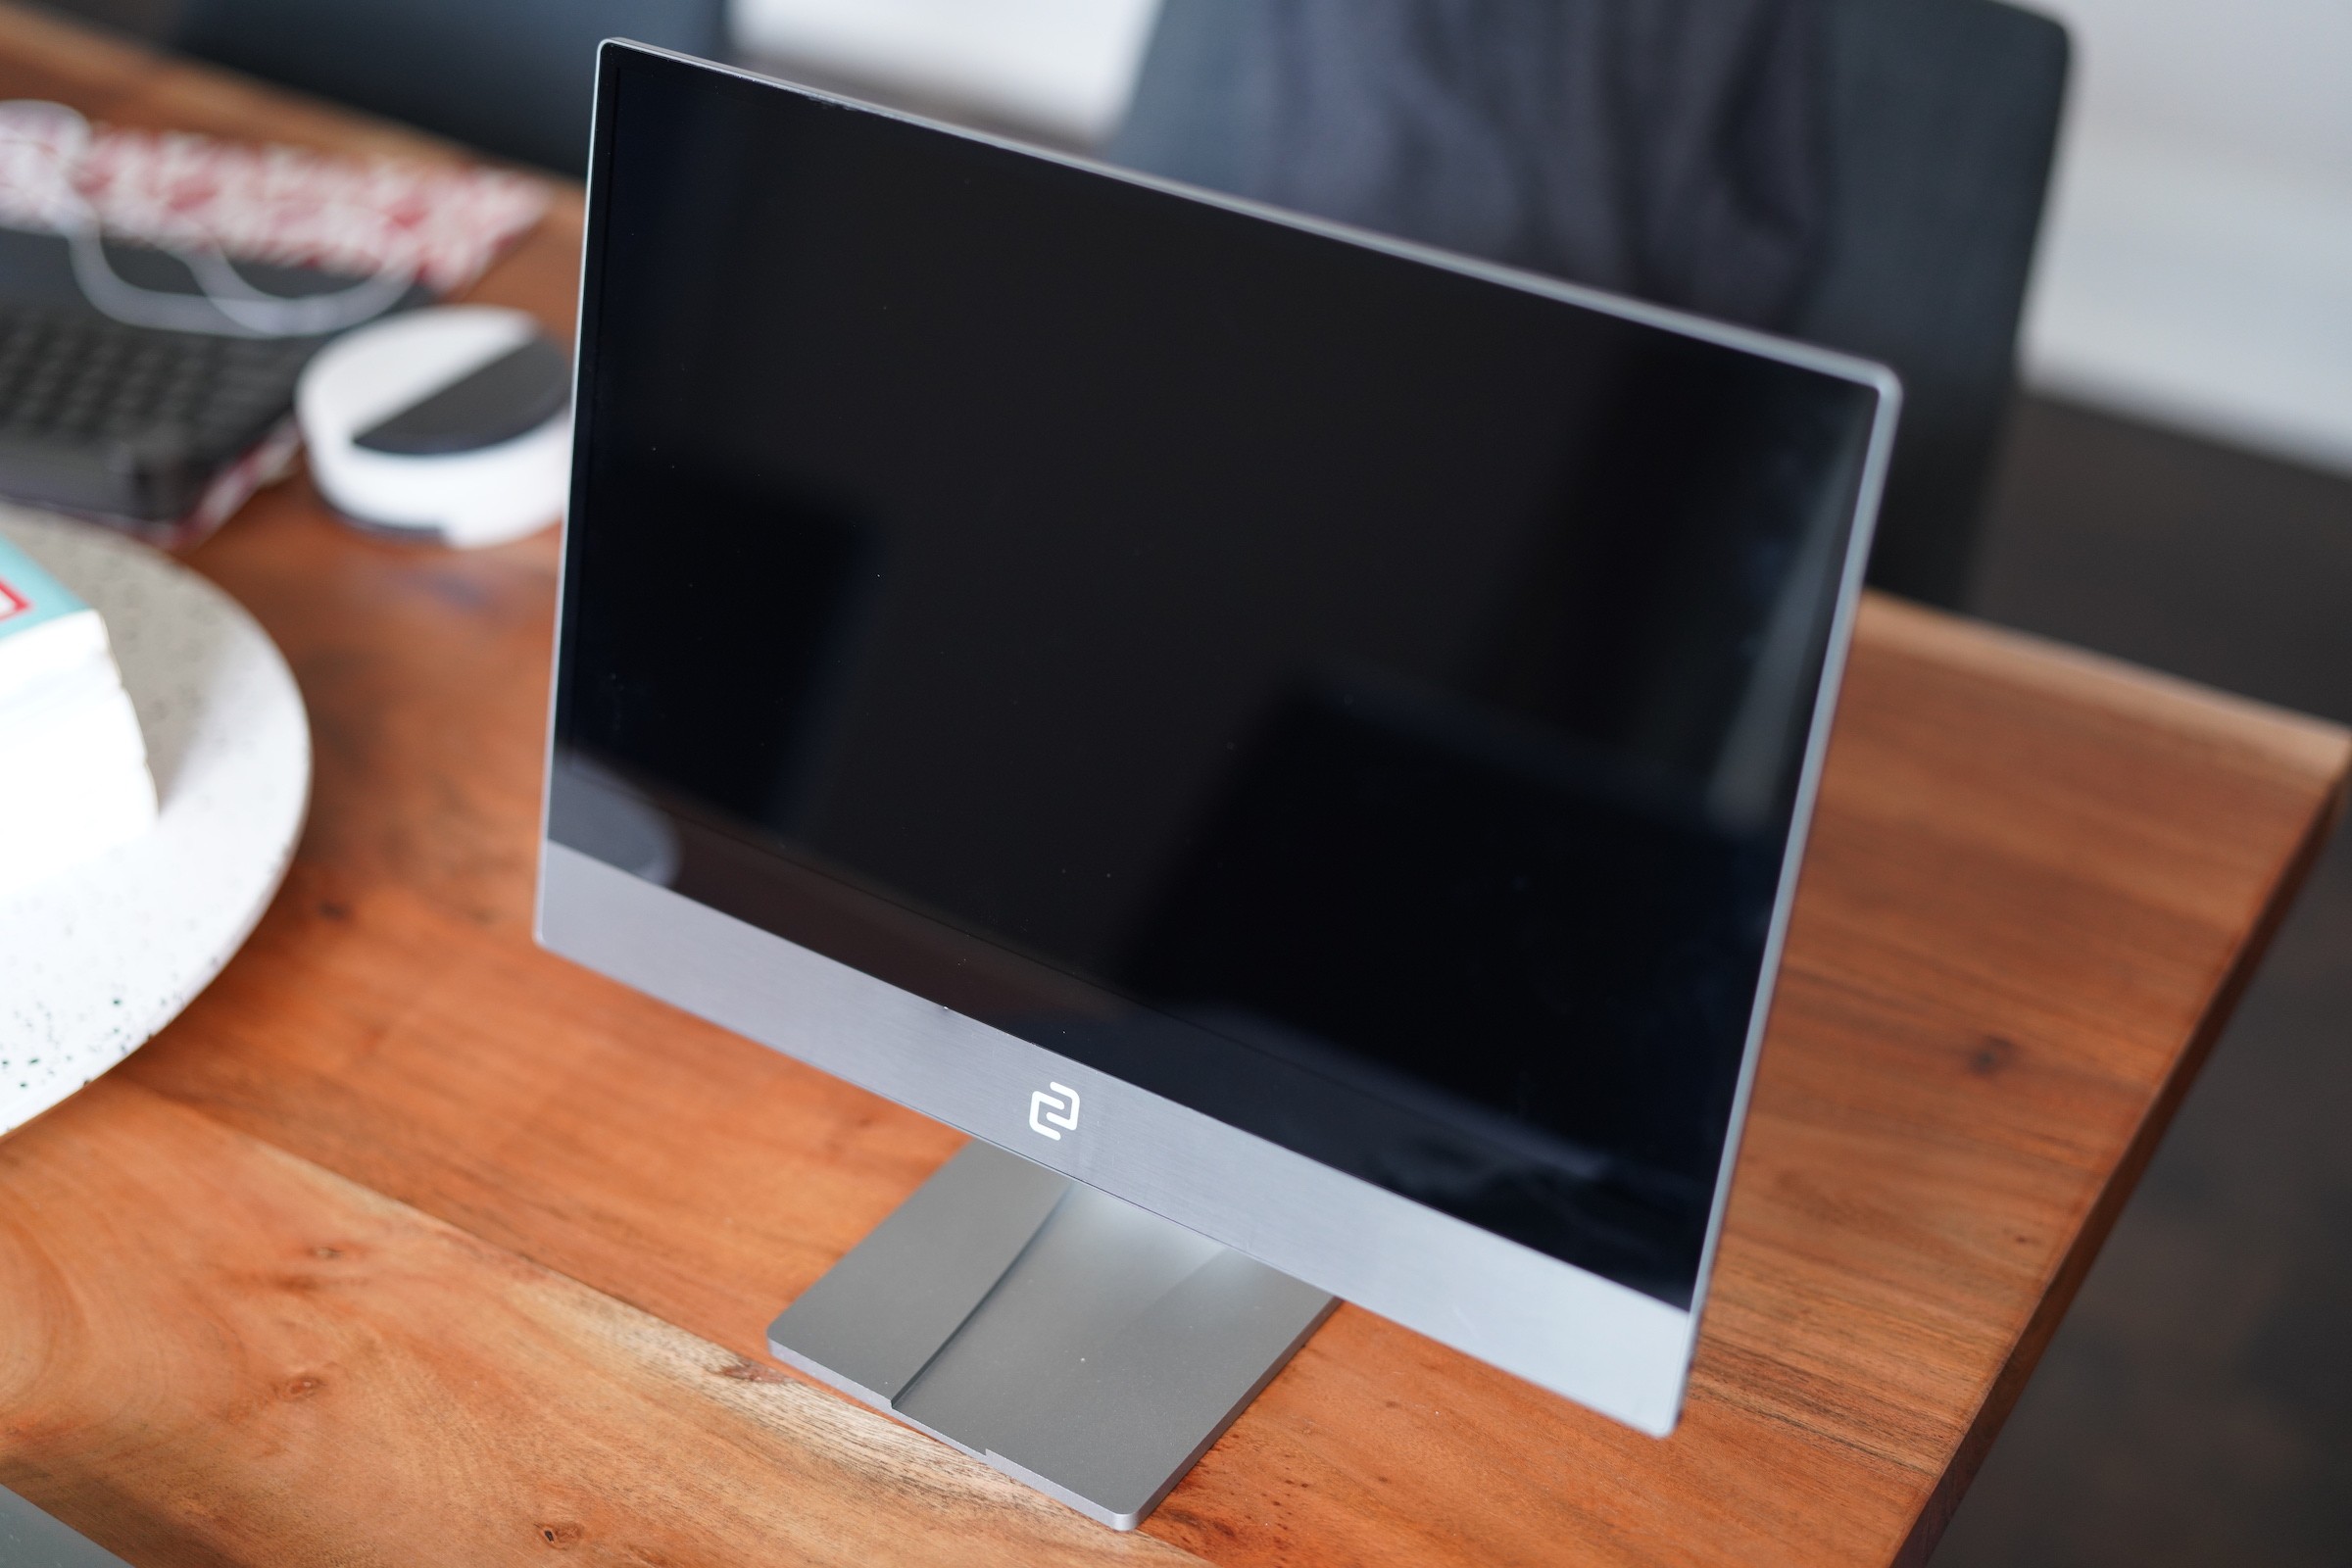 The Espresso Display is a fantastic portable display for your Mac or PC